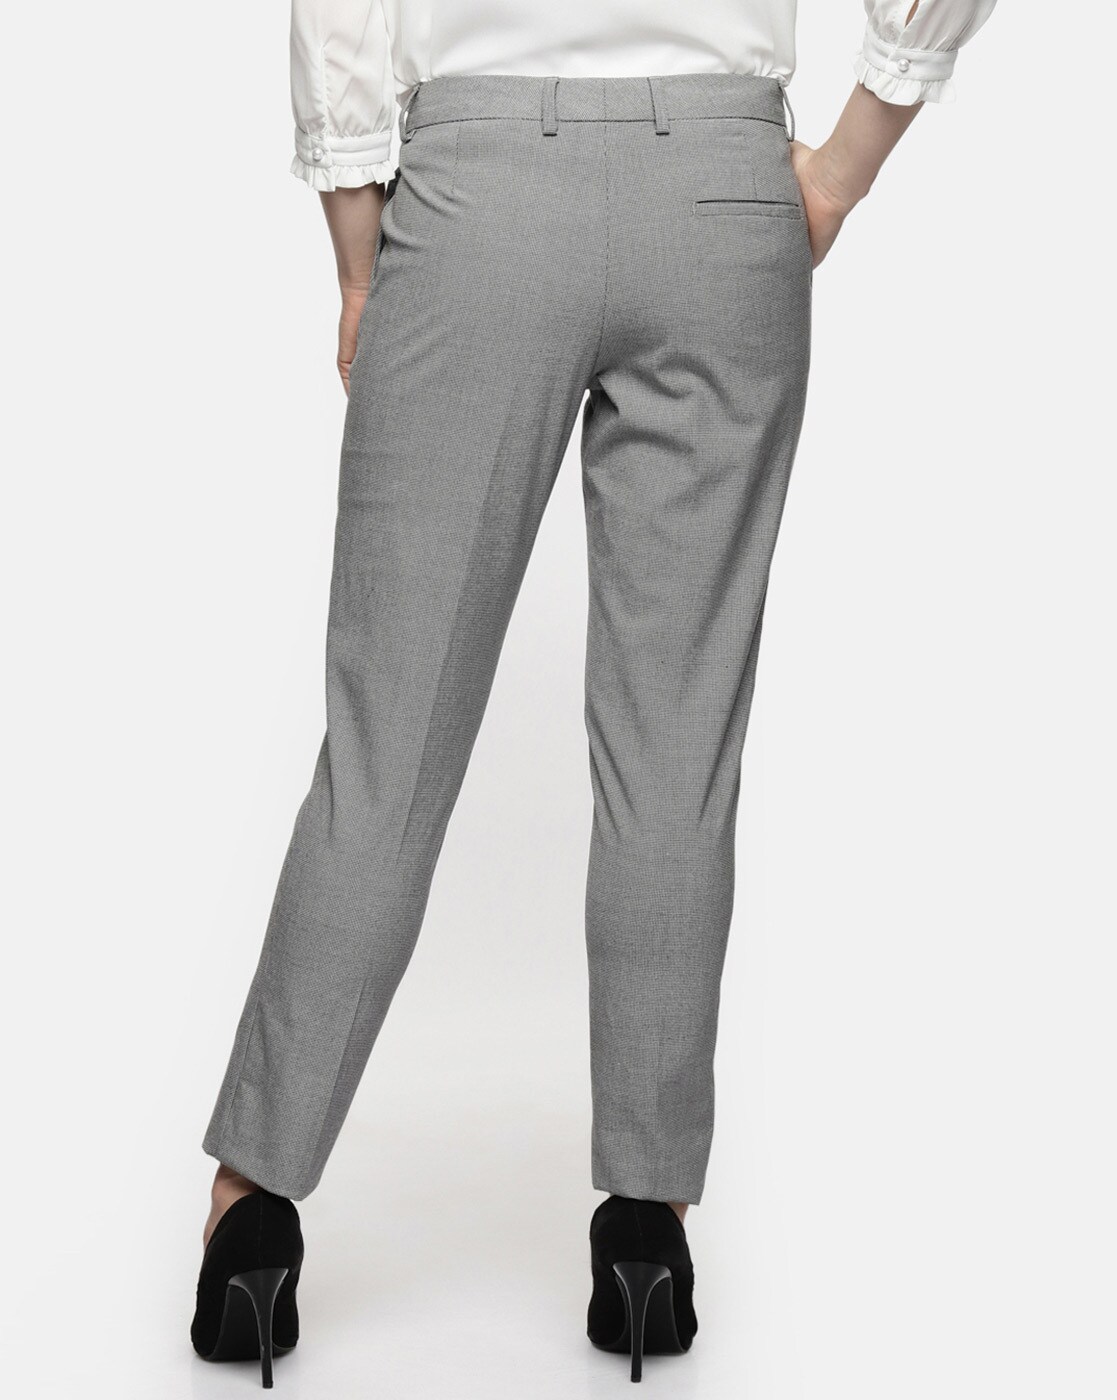 Grey Cotton Ladies Formal Pant at Rs 800/piece in Chennai | ID: 20625053462